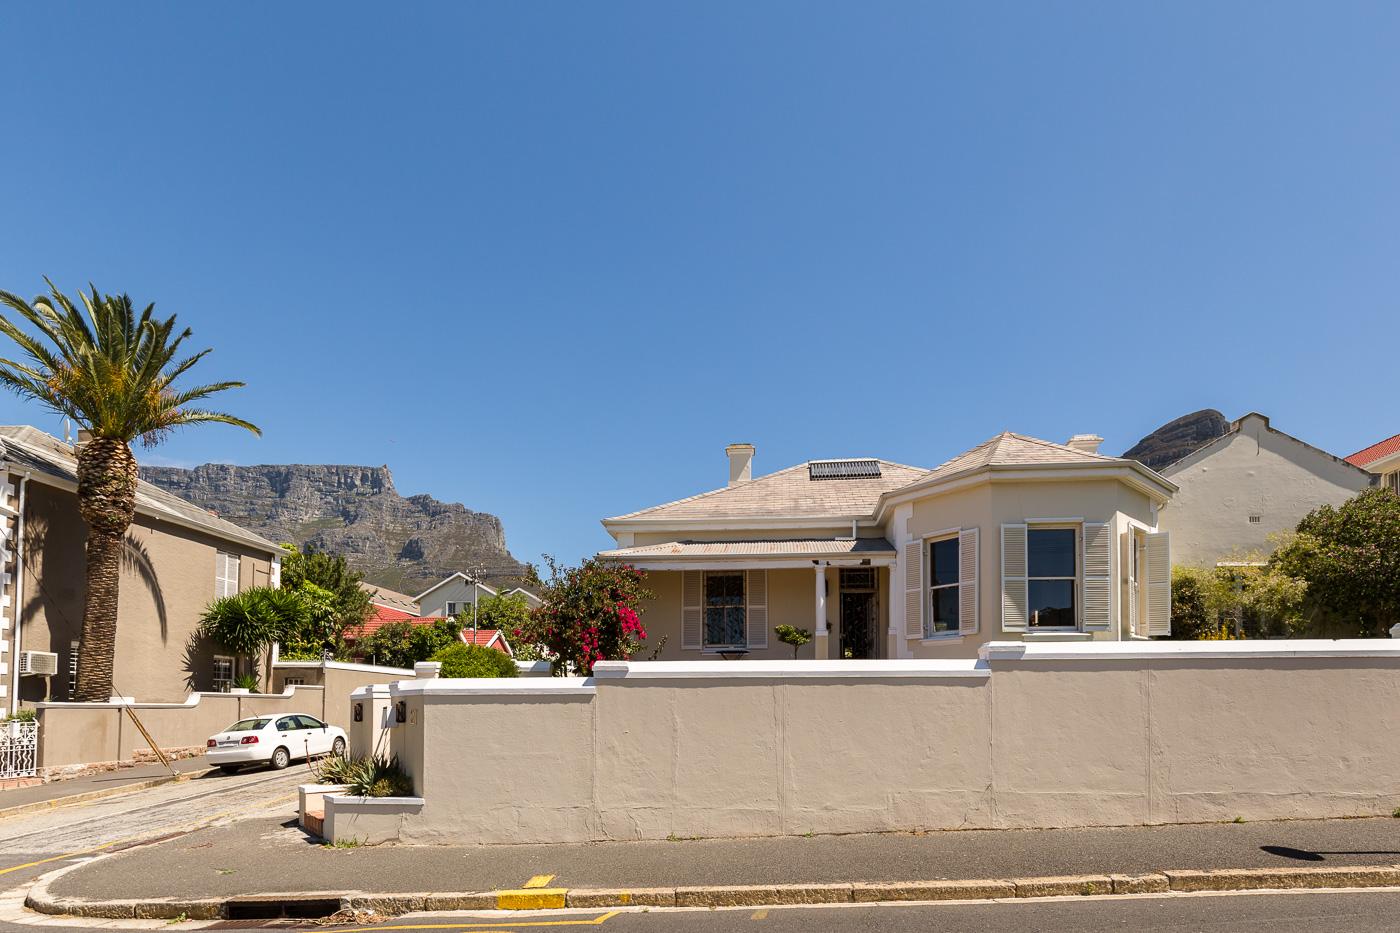 Photo 15 of Burnside House accommodation in Tamboerskloof, Cape Town with 3 bedrooms and 2 bathrooms